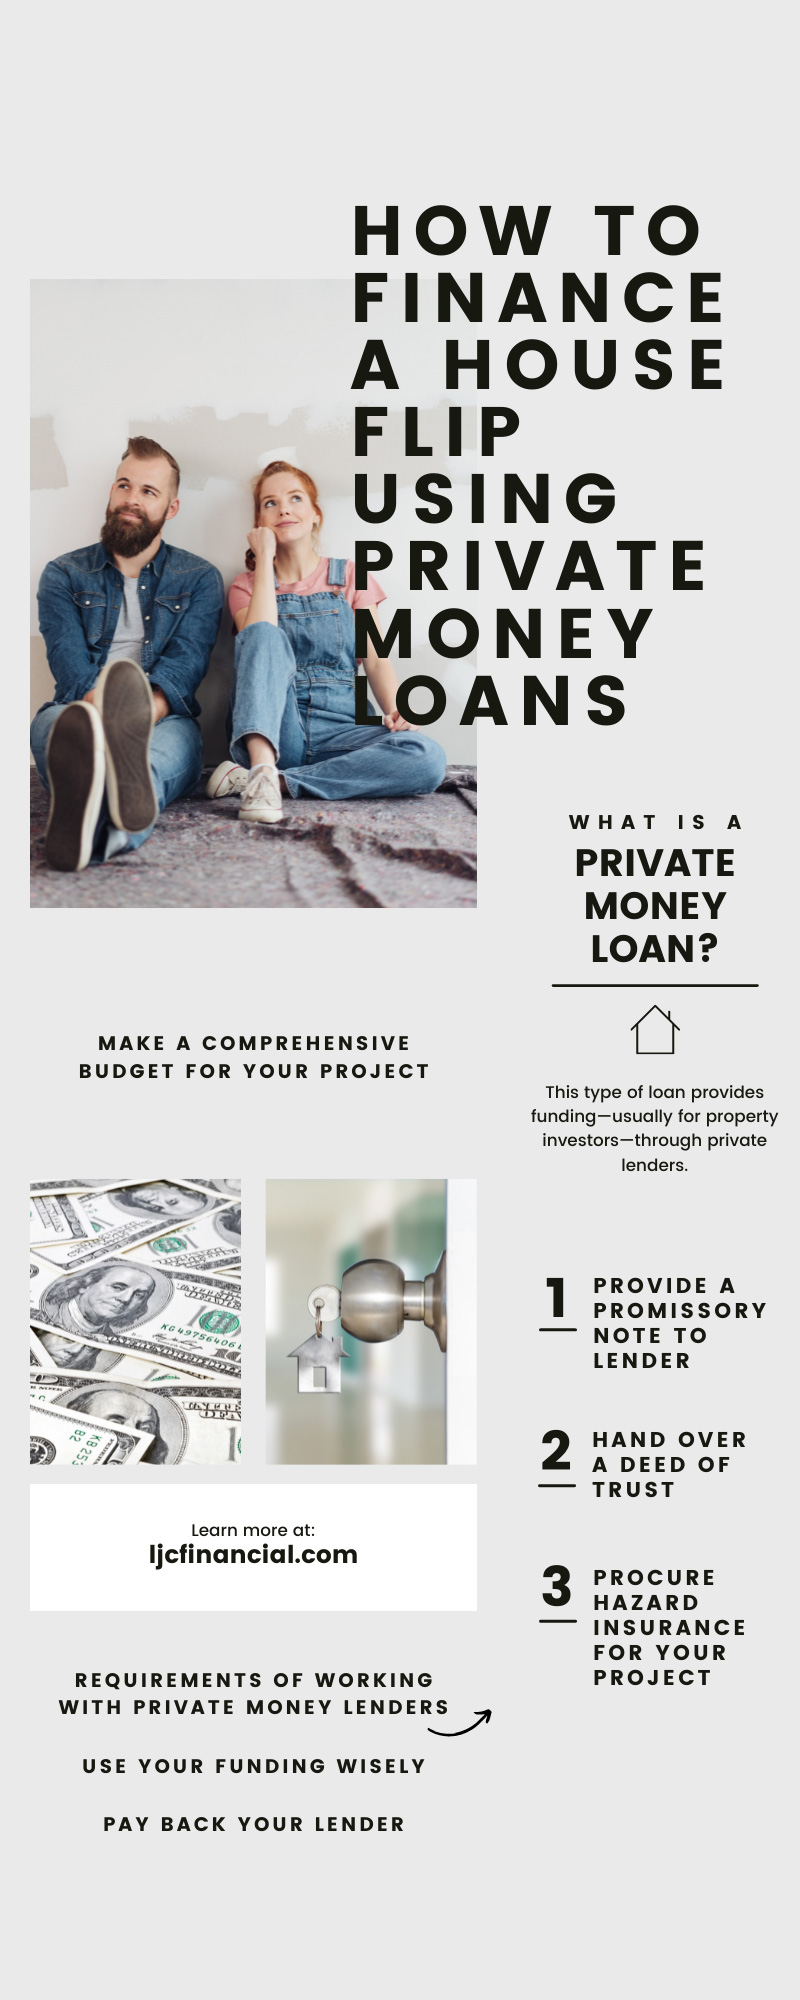 How to Finance a House Flip Using Private Money Loans Infographic